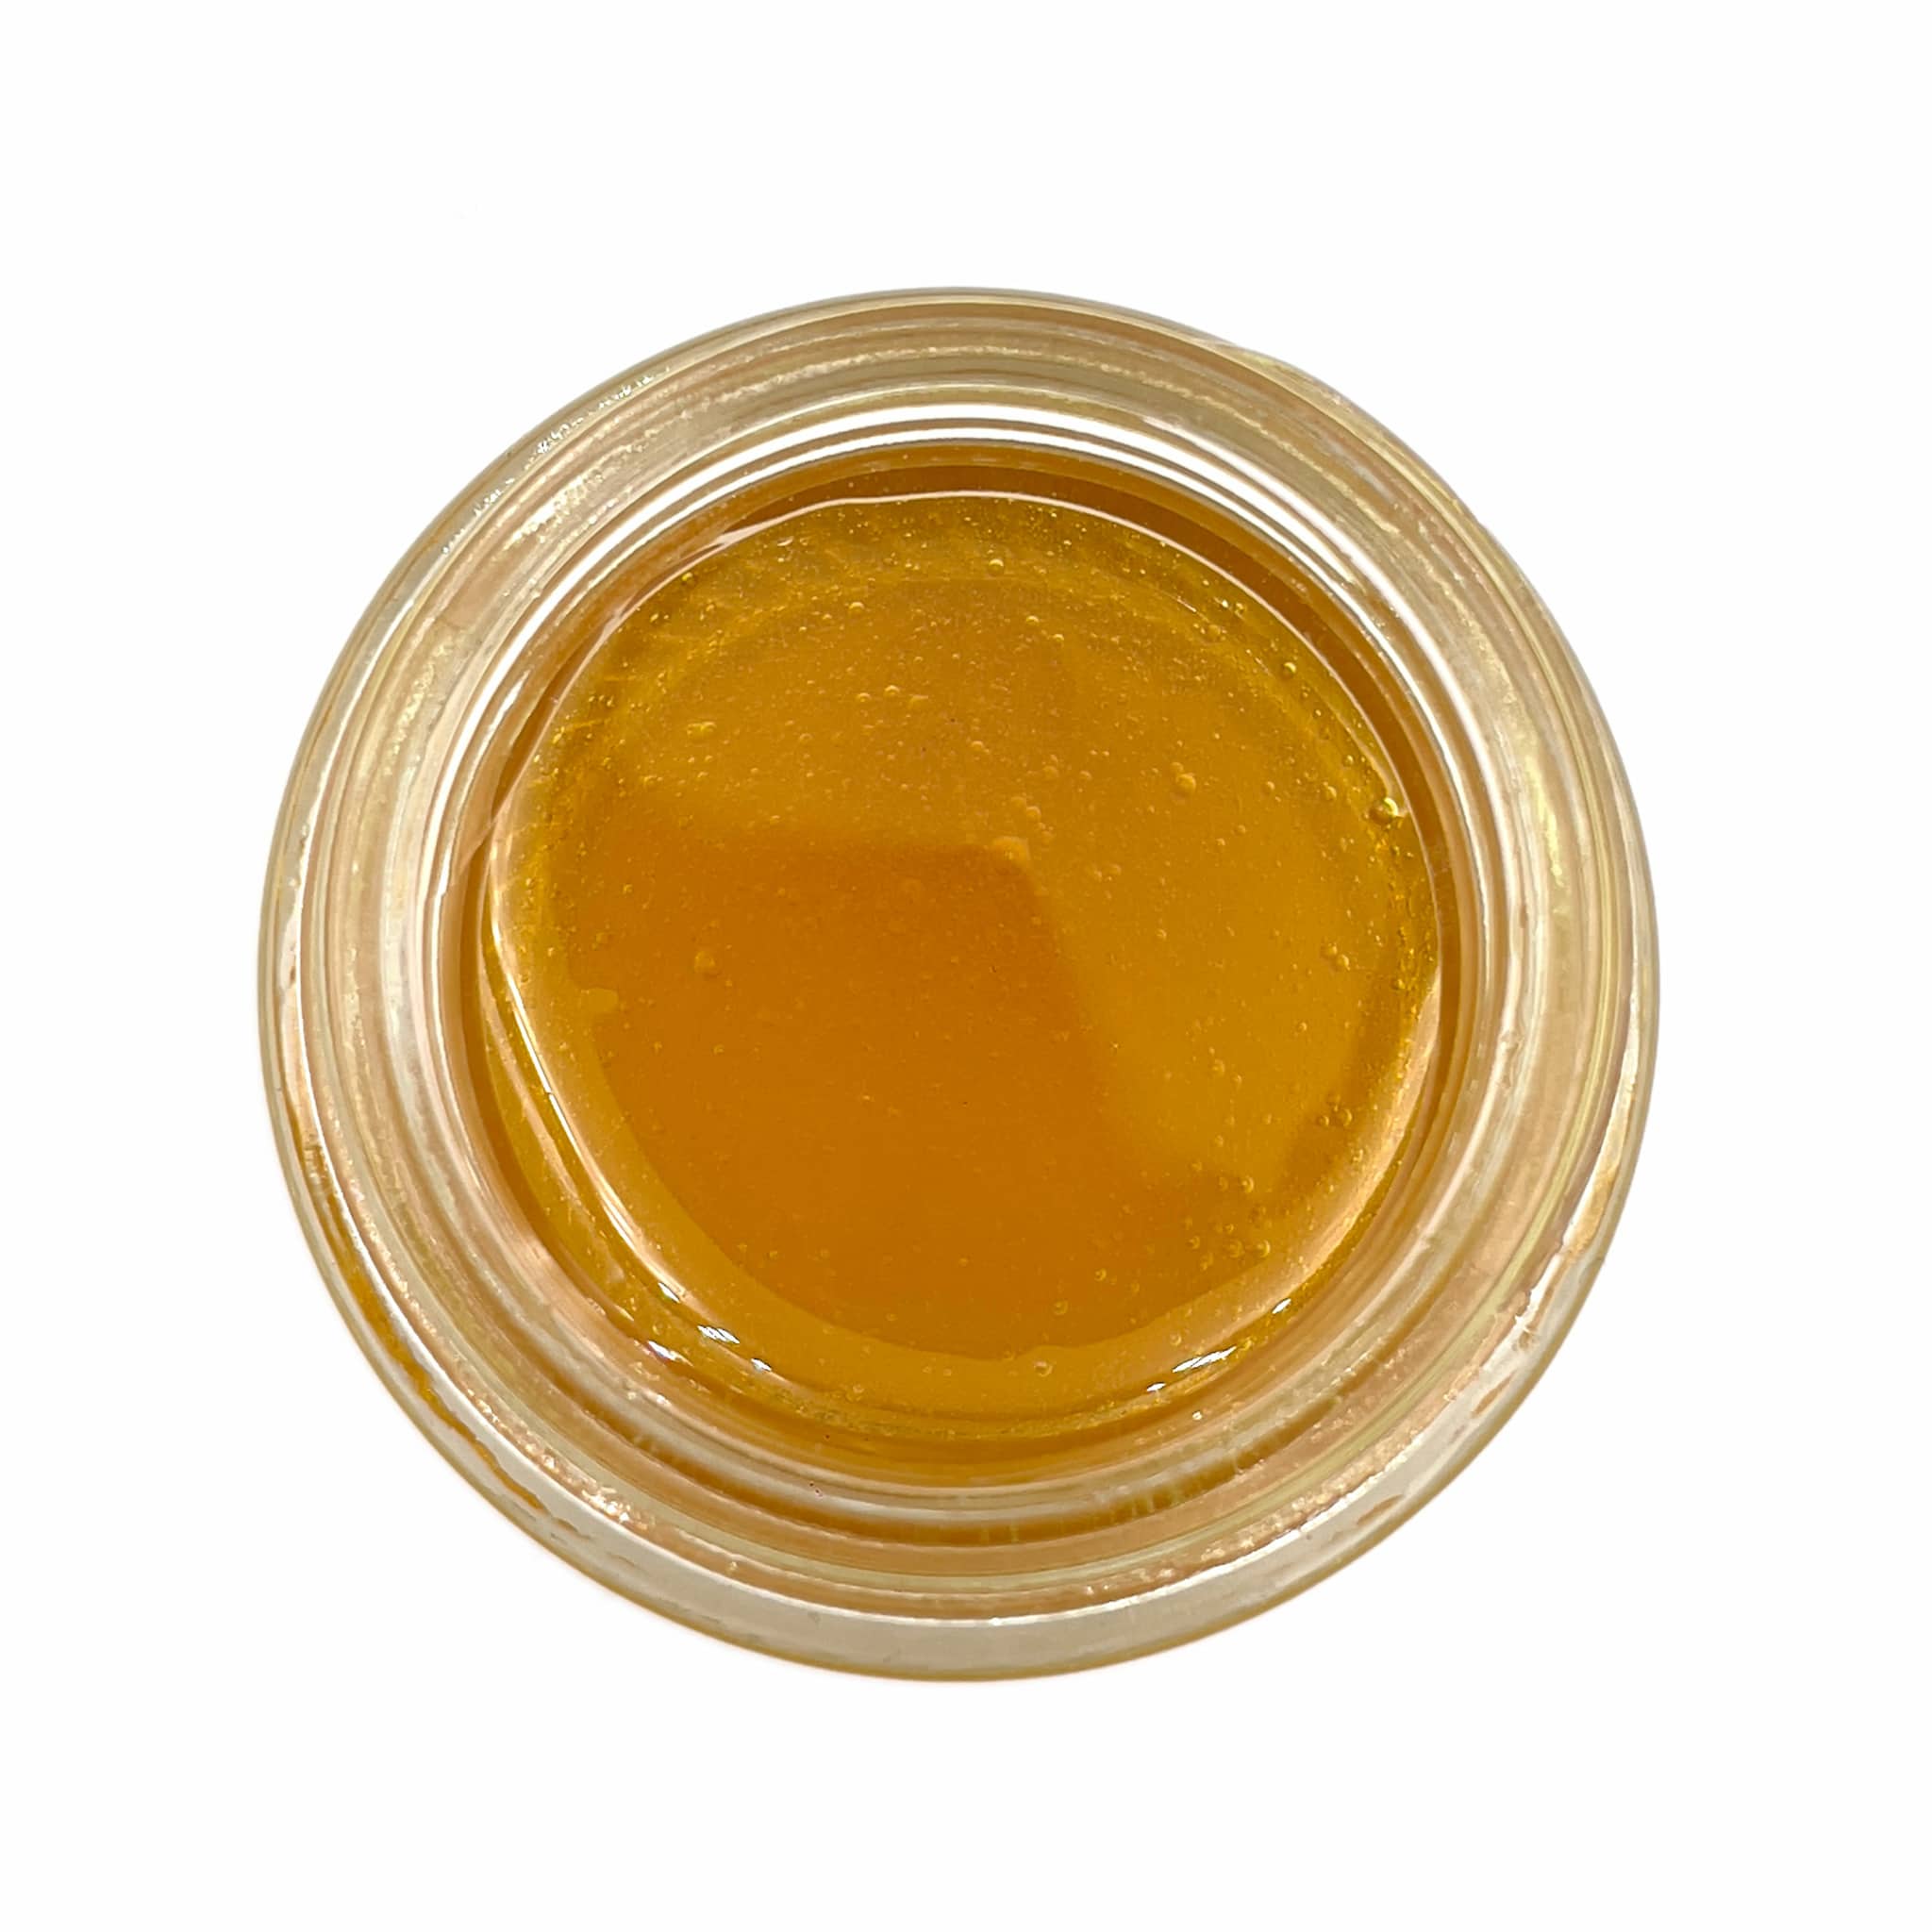 HTFSE Sauce - Zkittles - Buy Online In Canada - Pacific Grass